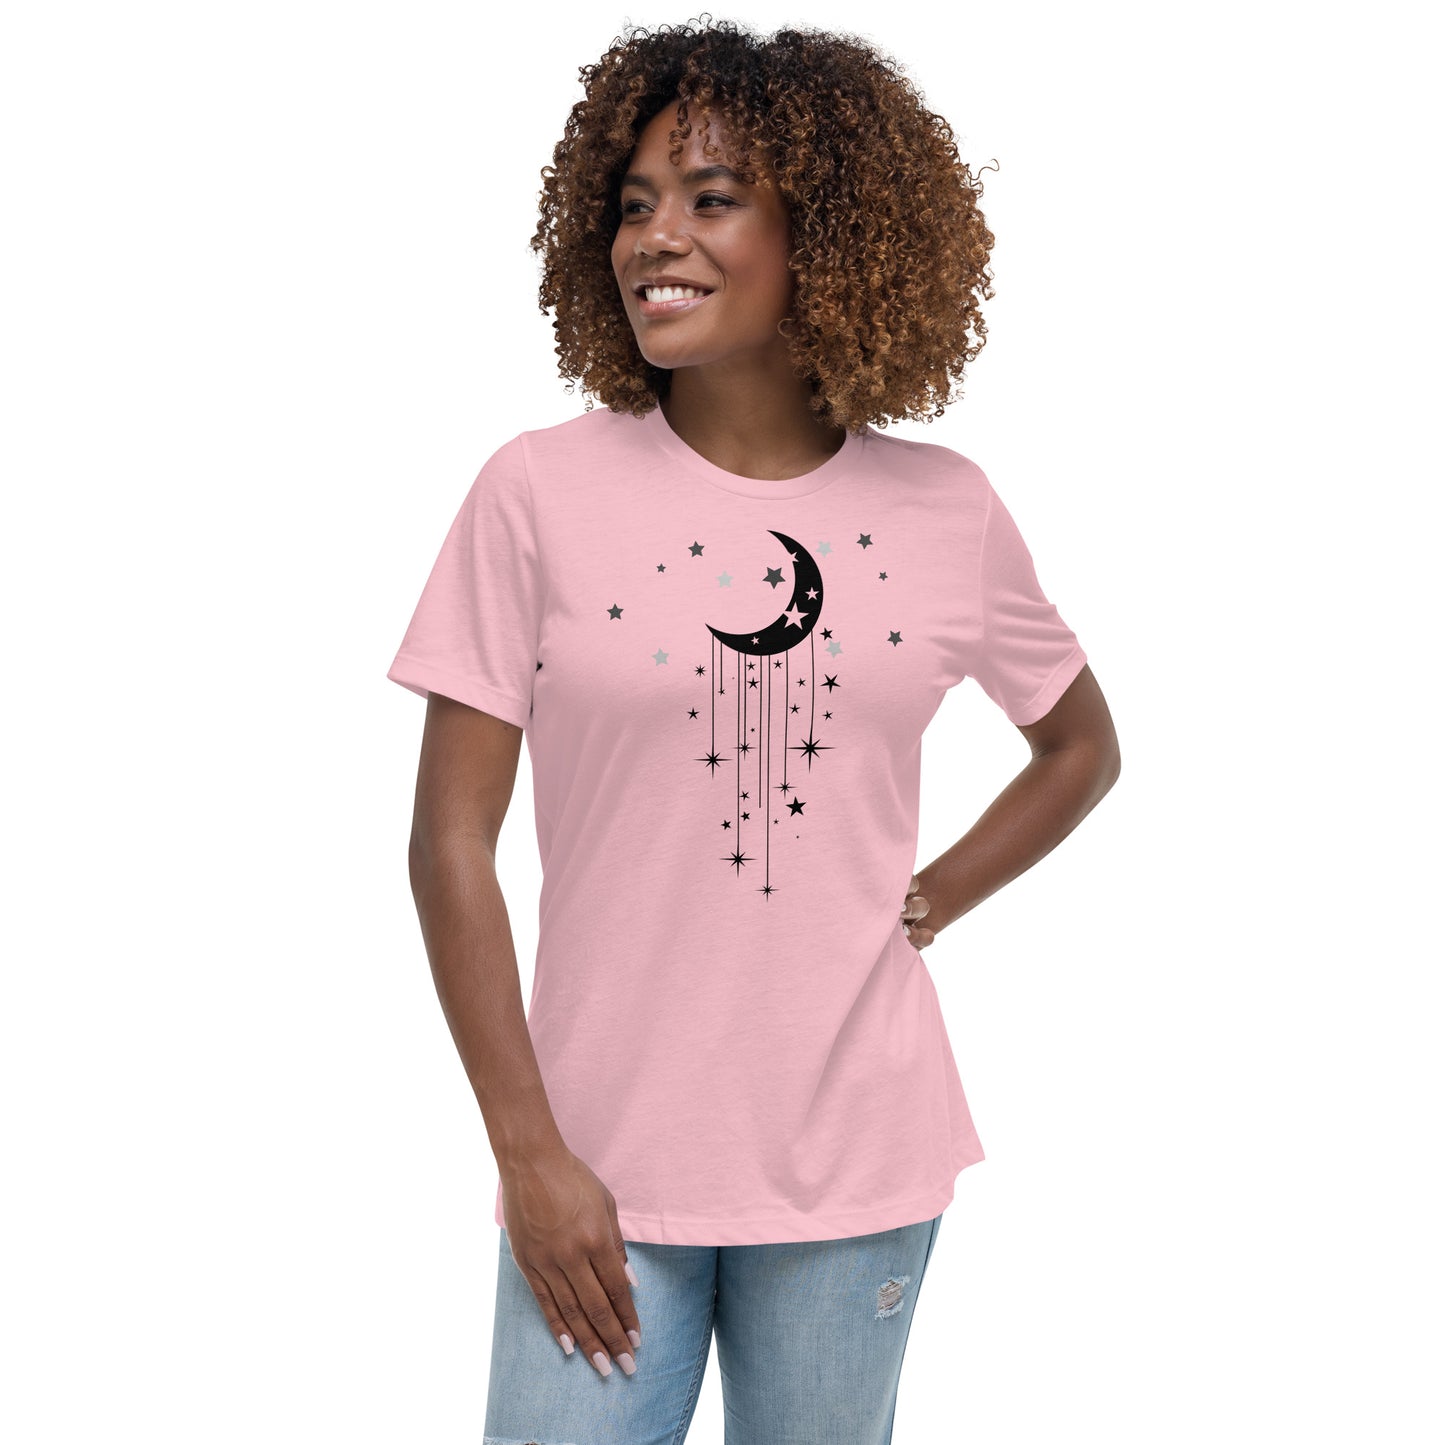 Moon Charm Women's Relaxed Fit T-Shirt